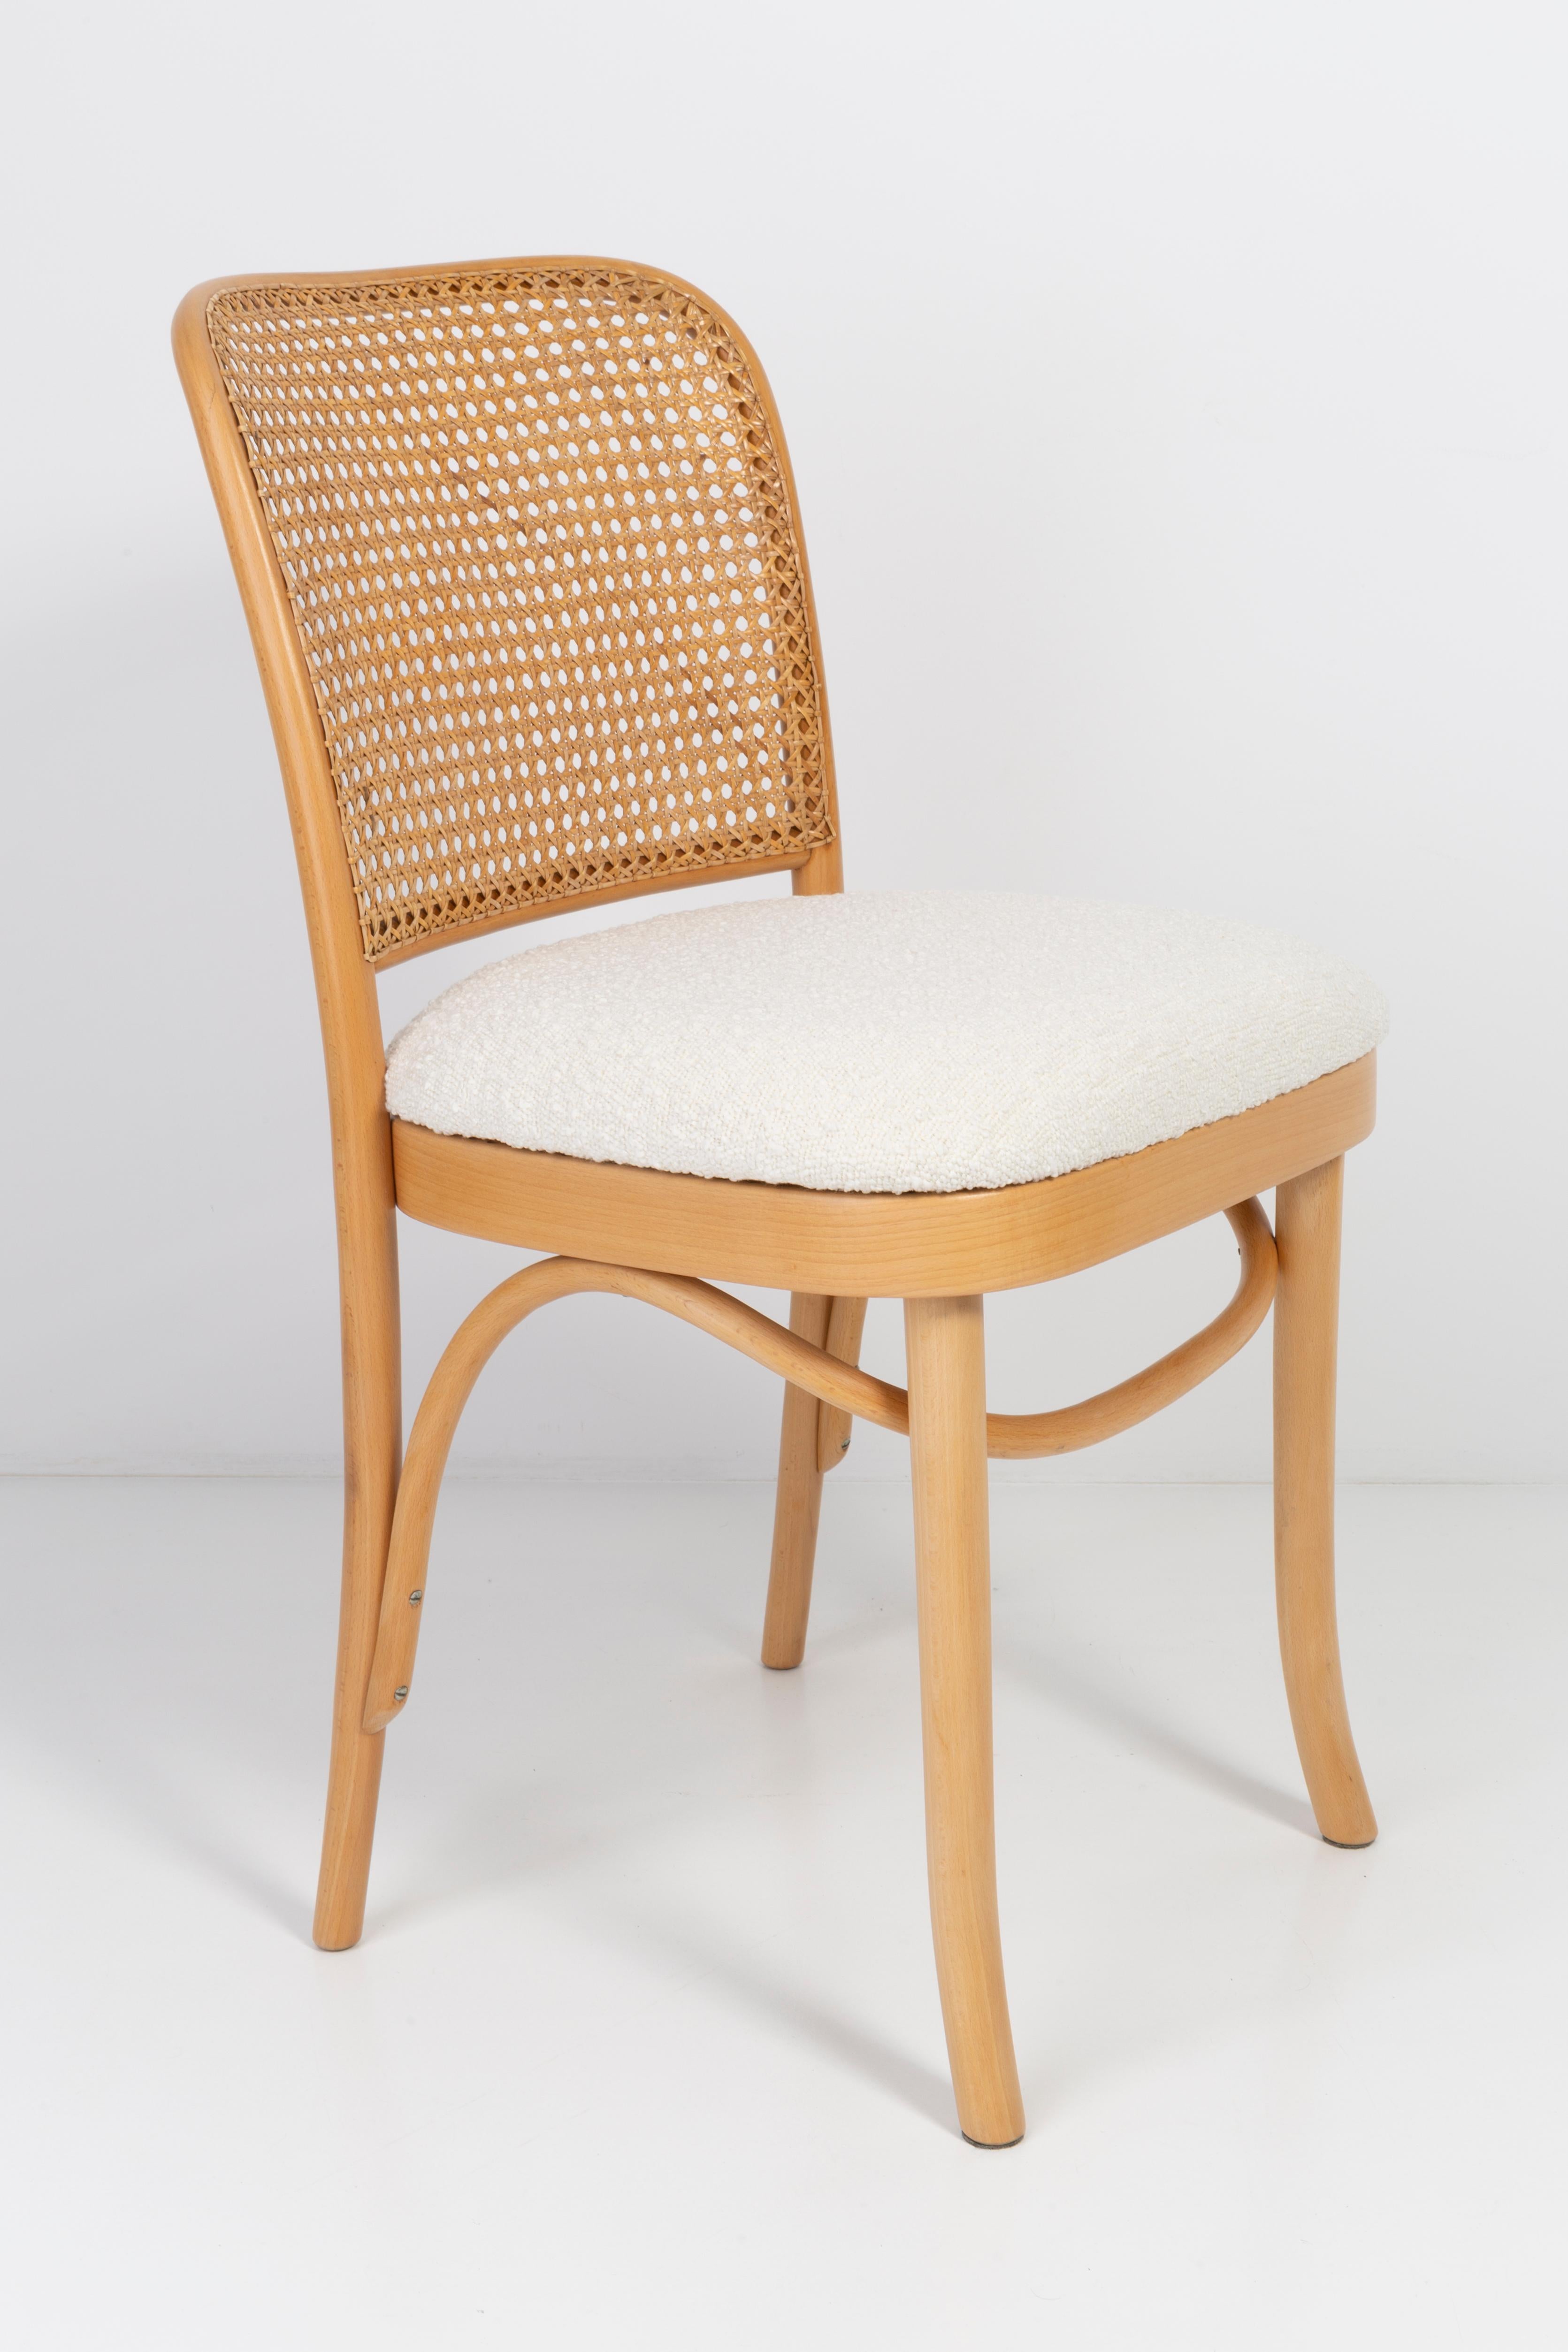 Velvet Set of Eight White Boucle Thonet Wood Rattan Chairs, 1960s For Sale